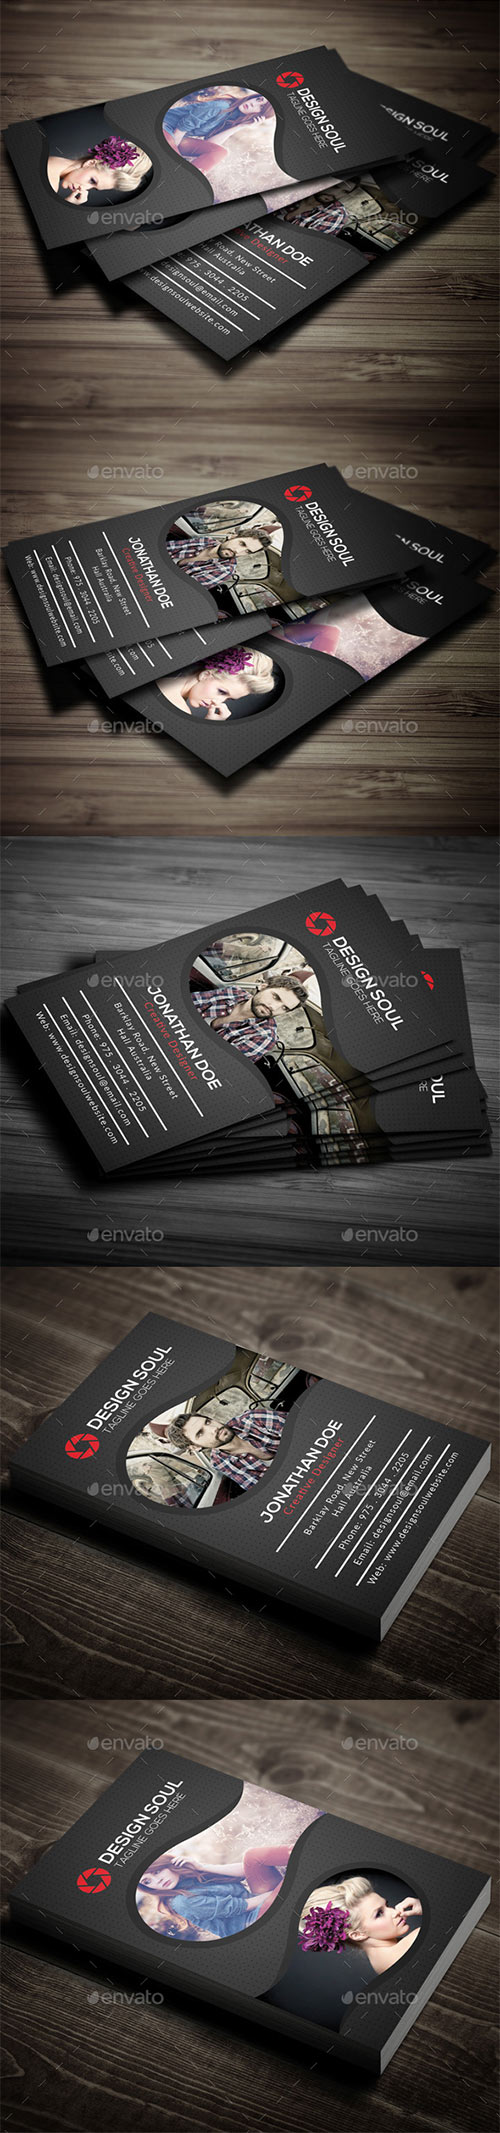 Photography Business Card 14577322